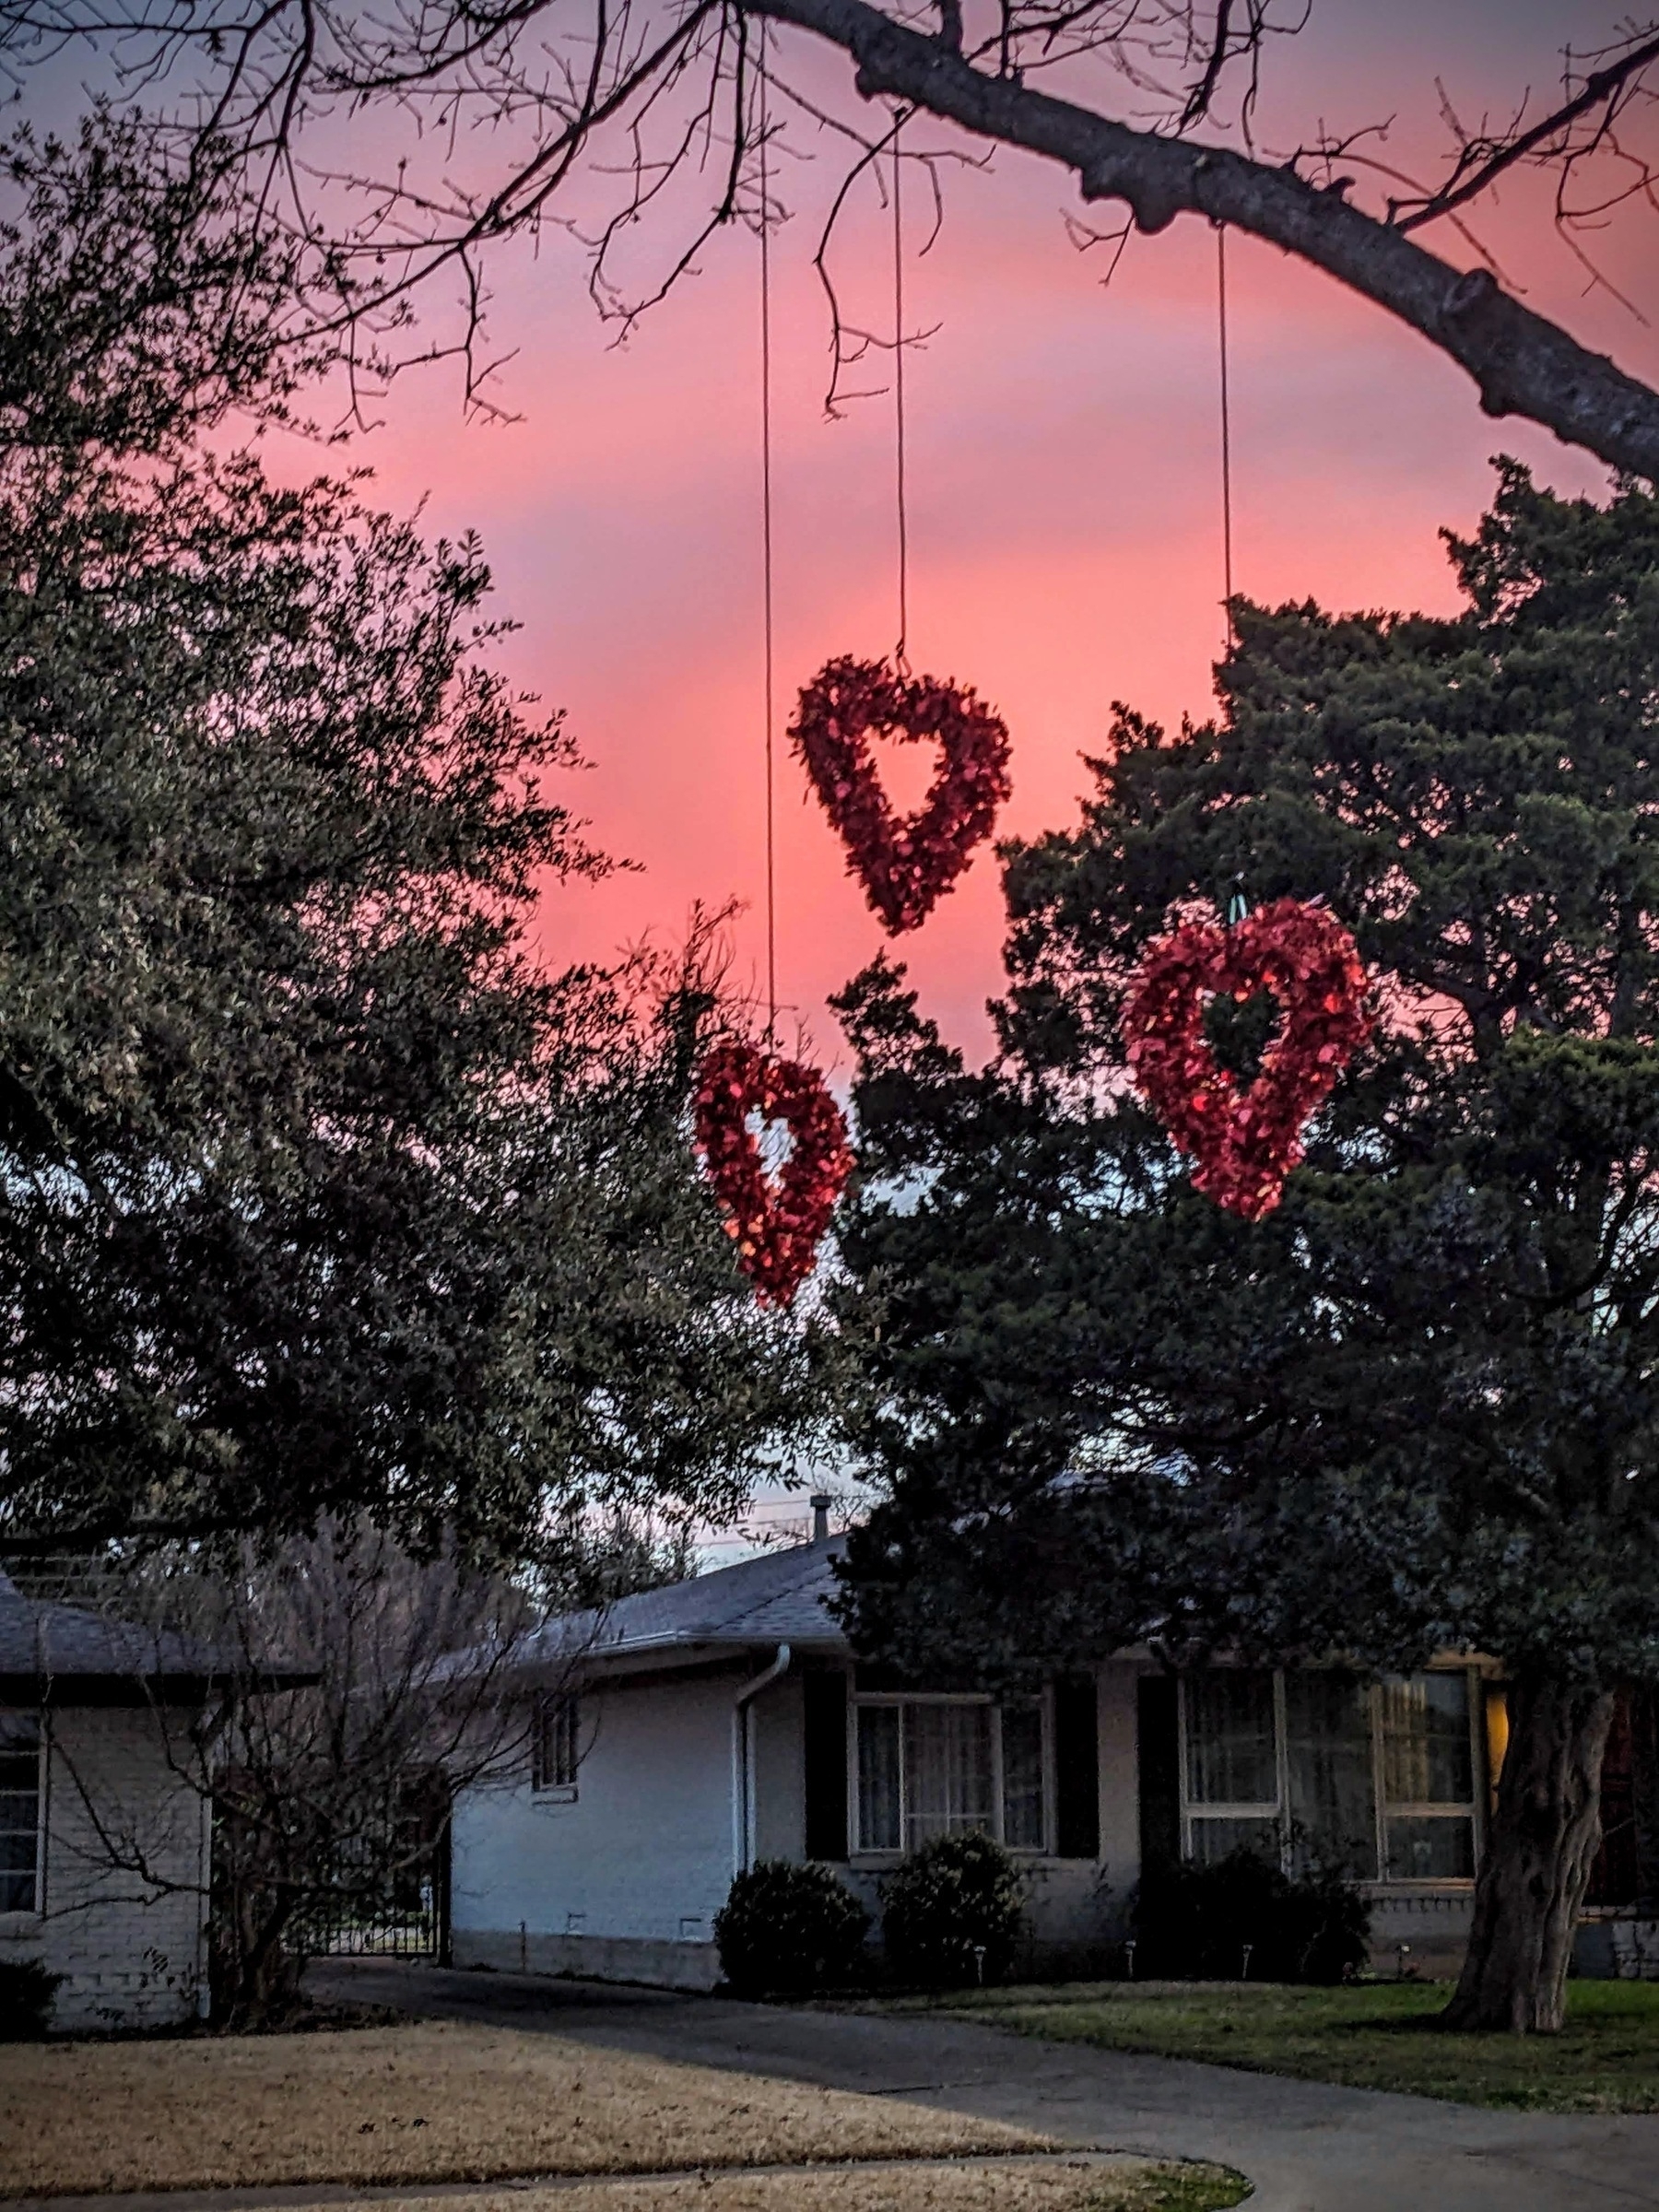 3 Valentine heart decorations in a tree at sunrise